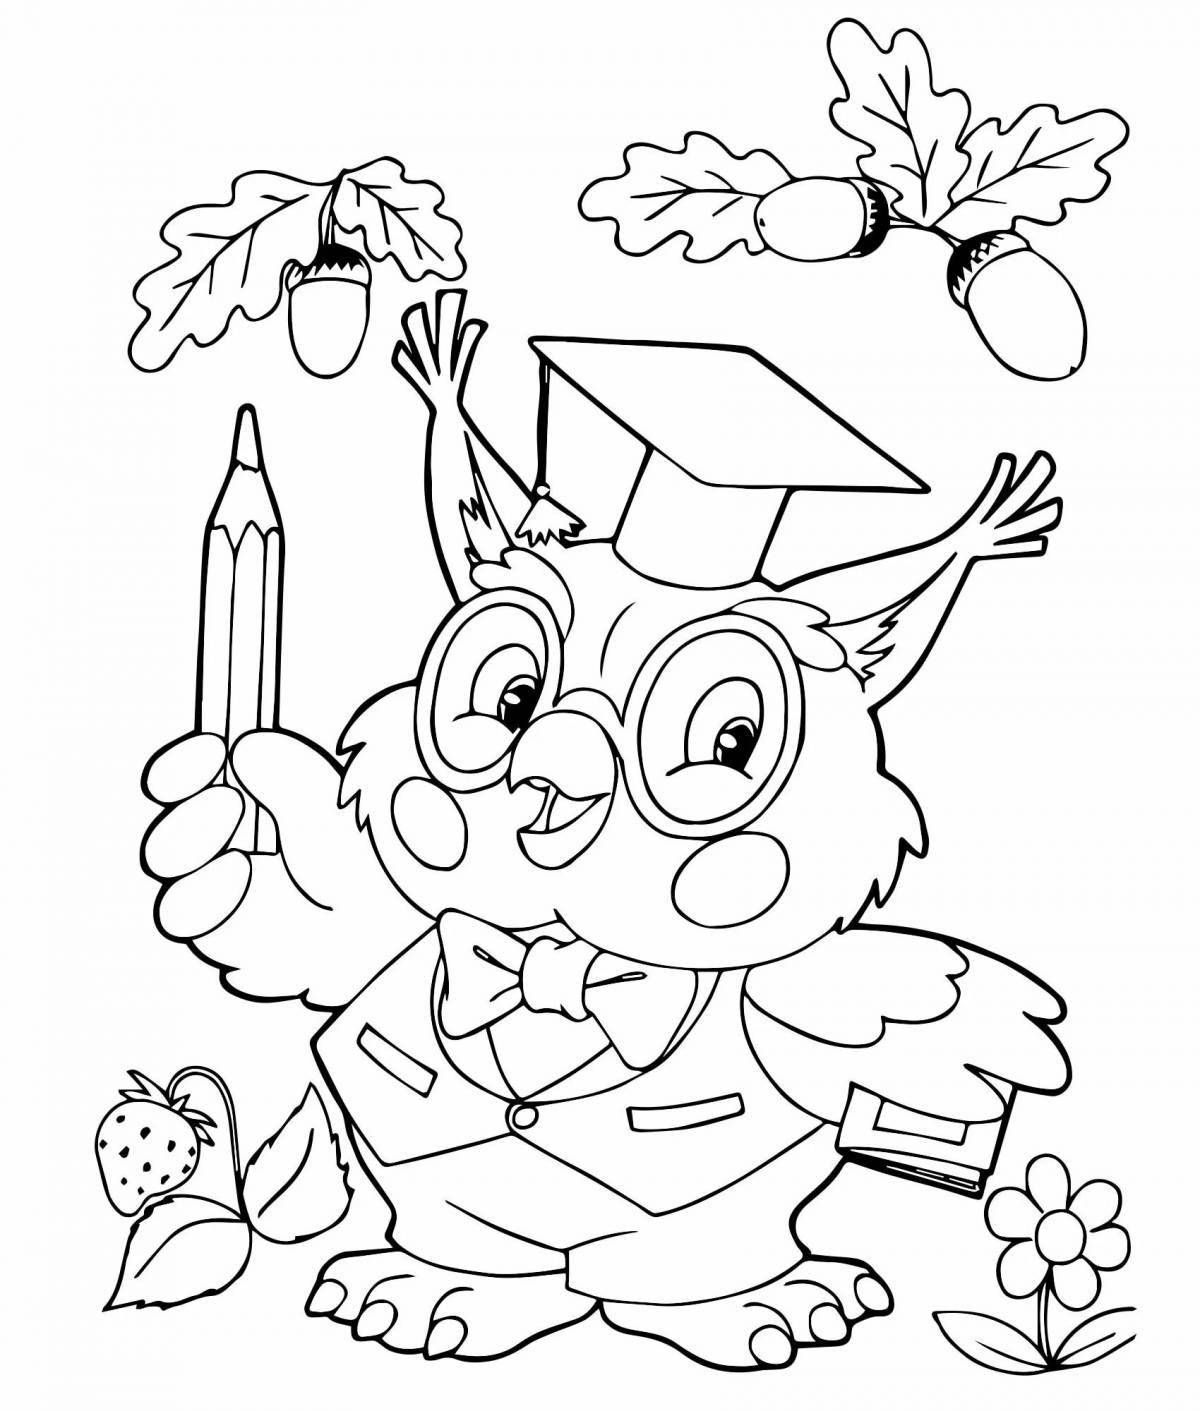 Colour coloring book for first graders